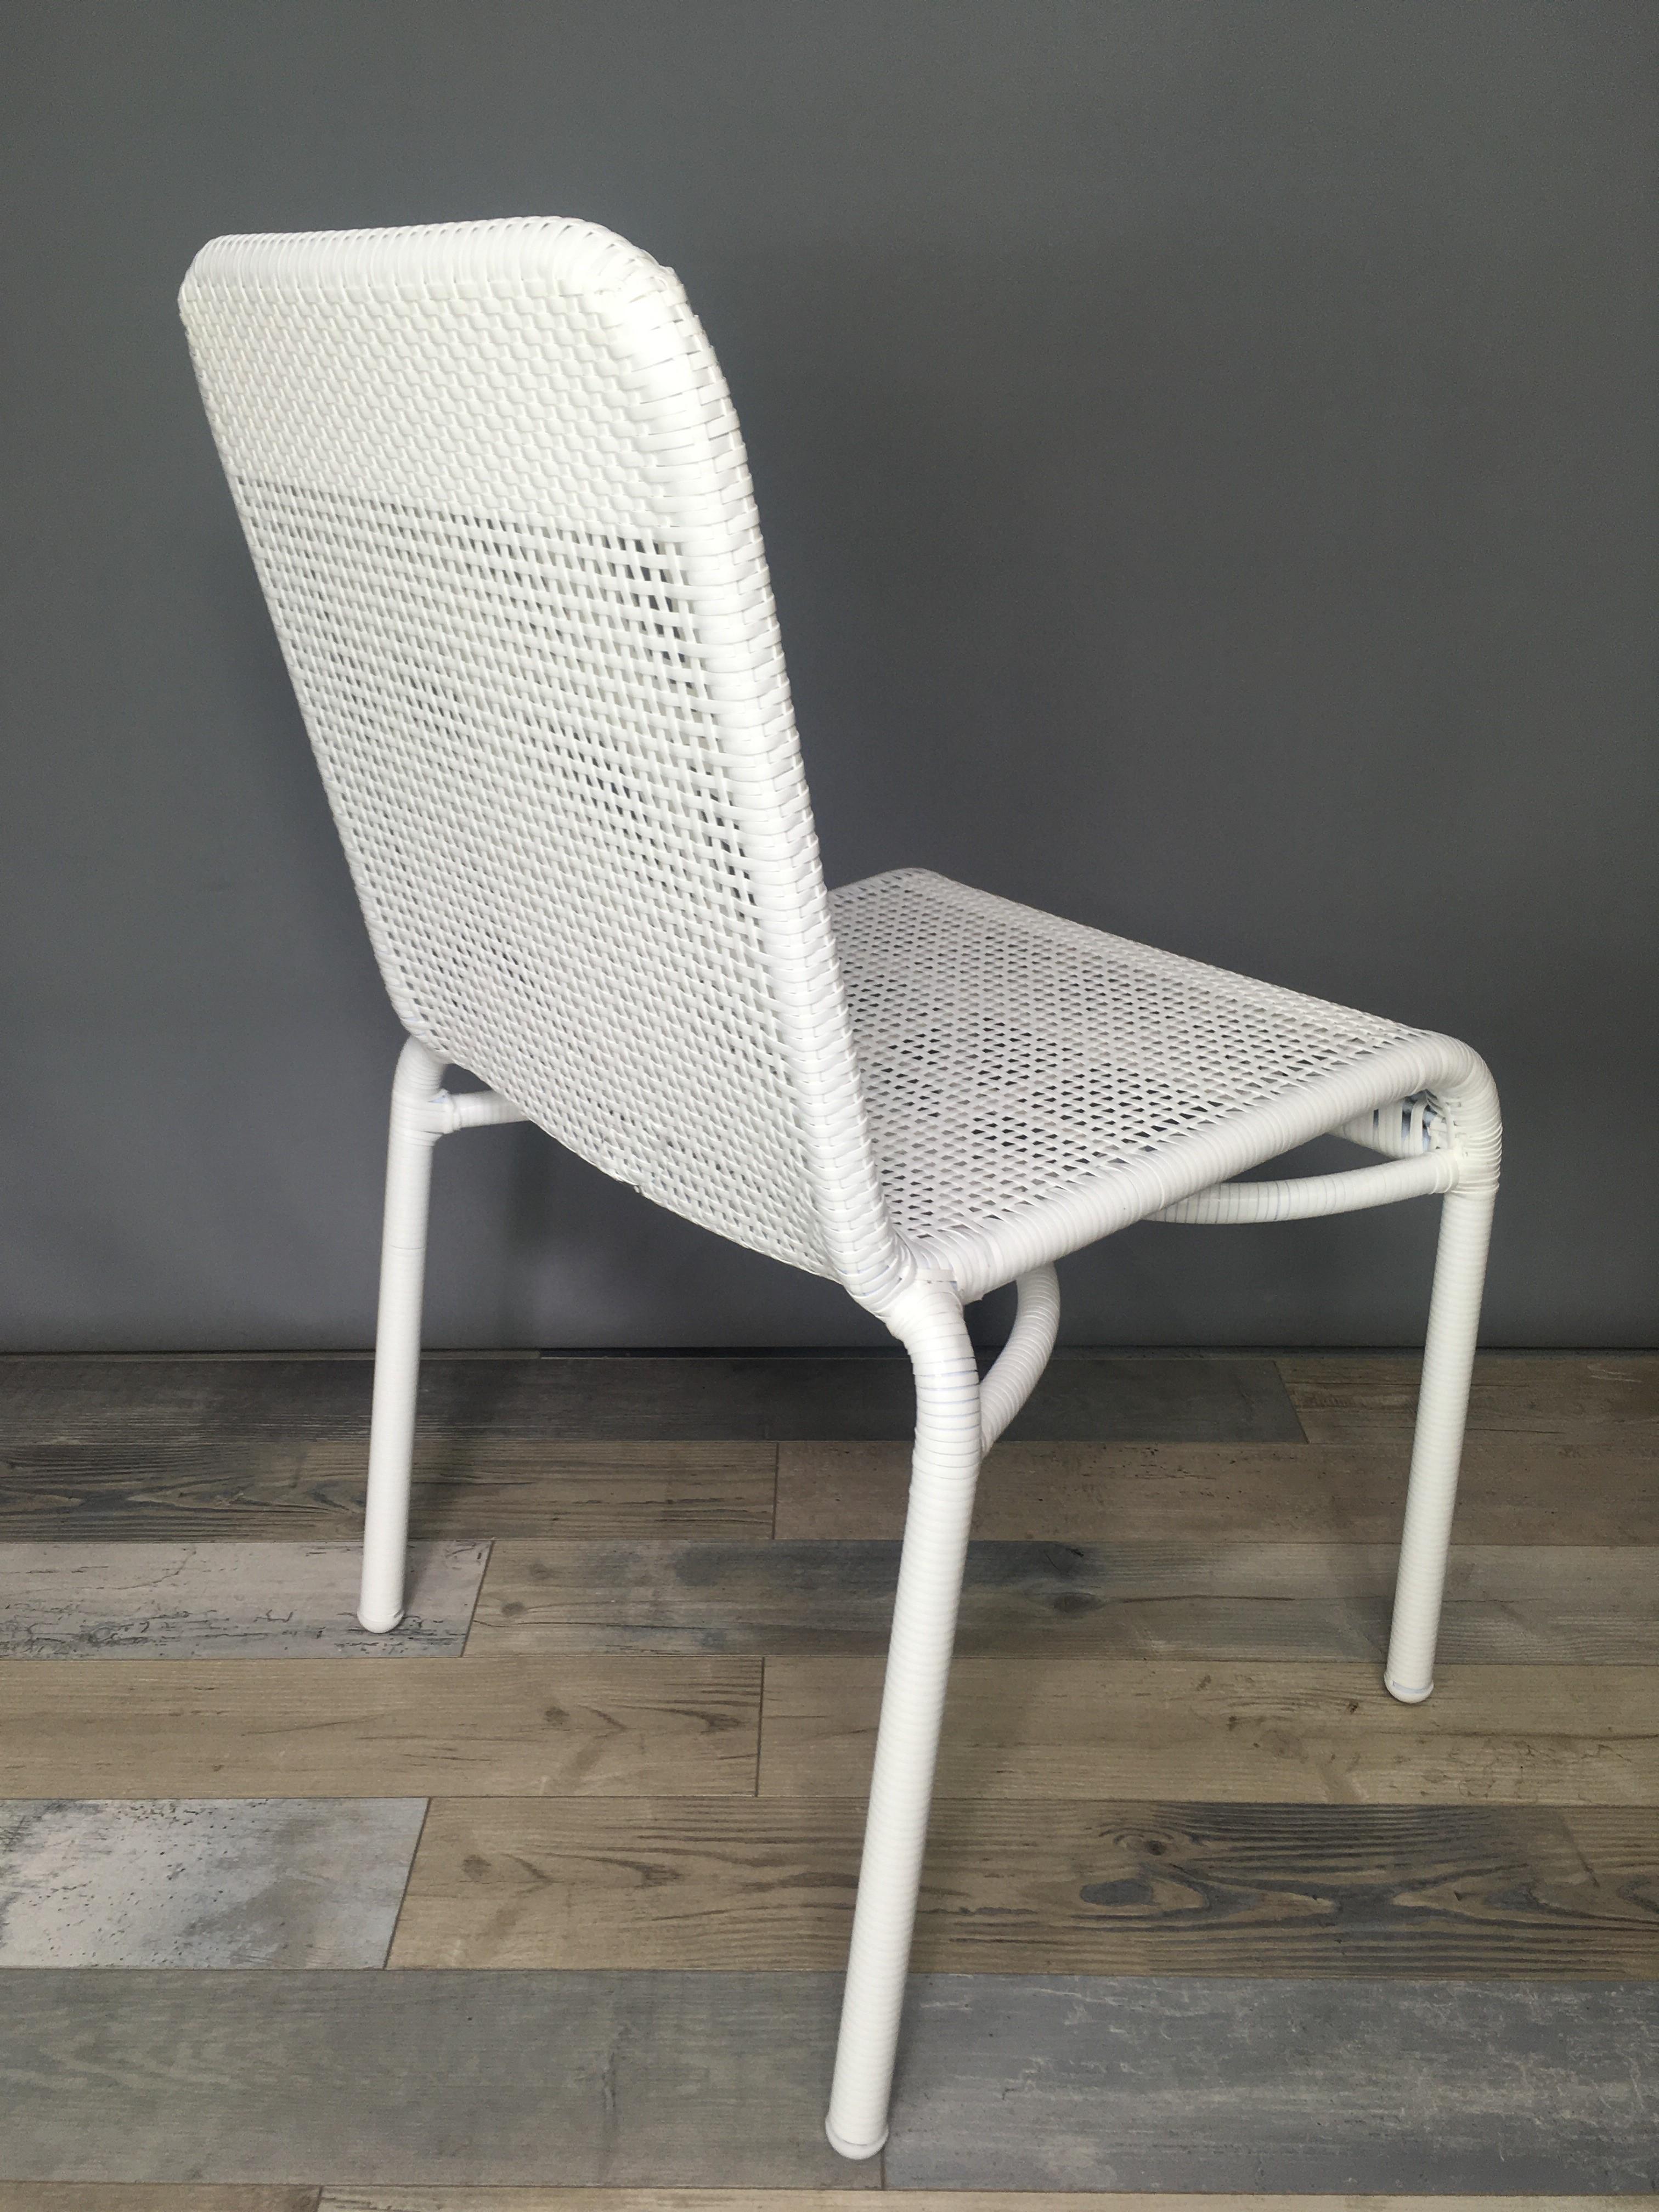 Contemporary Metal And White Braided Resin Outdoor Chair For Sale